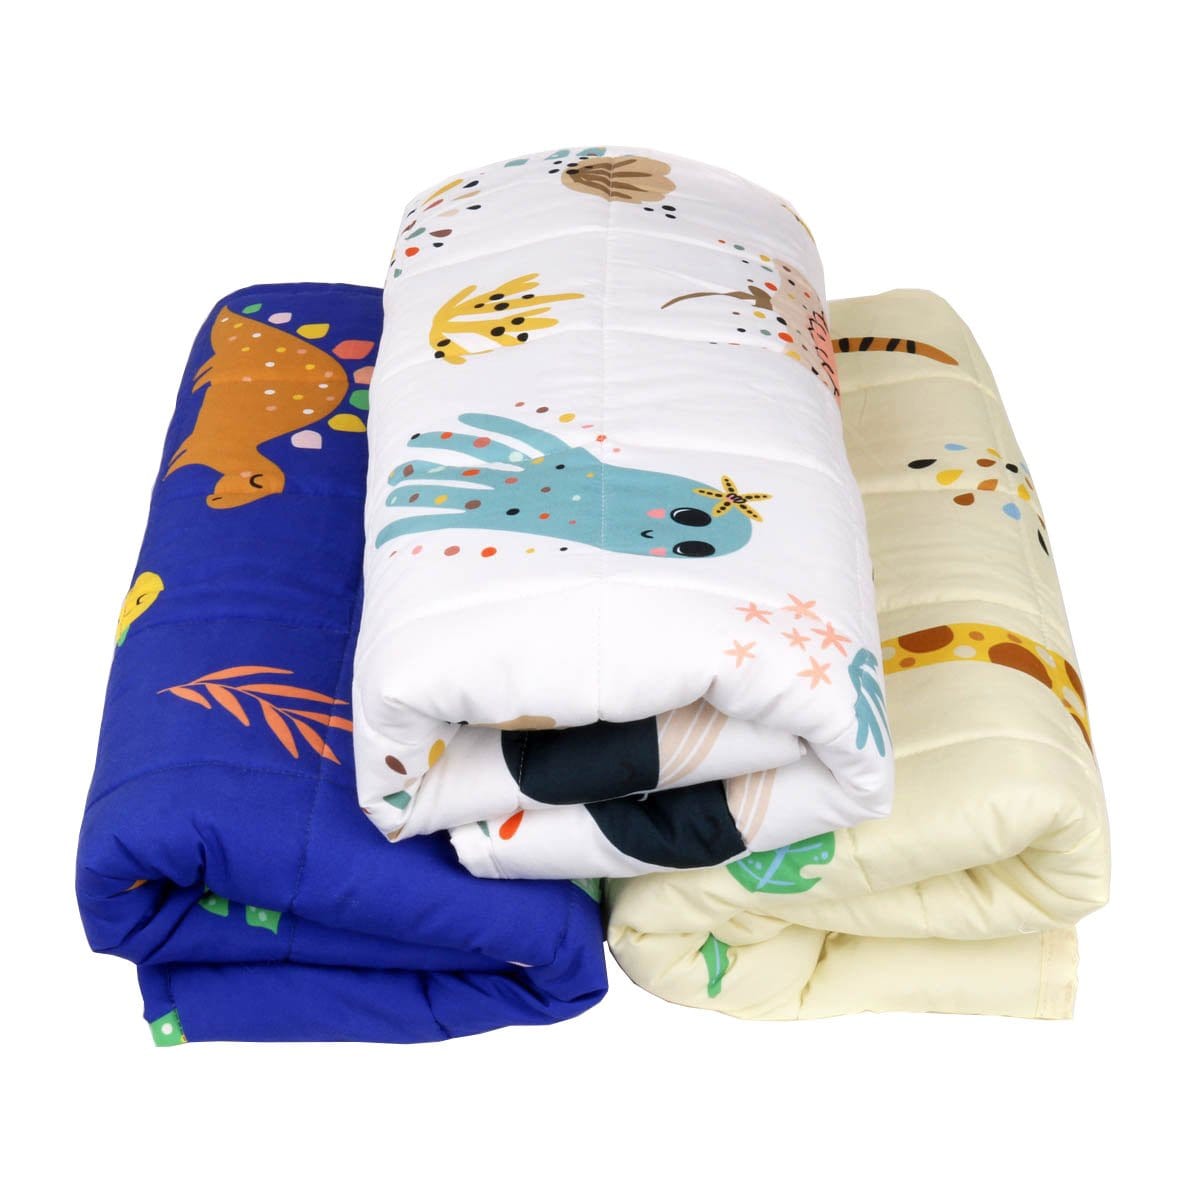 Sensory Calming Weighted Blanket for Kids